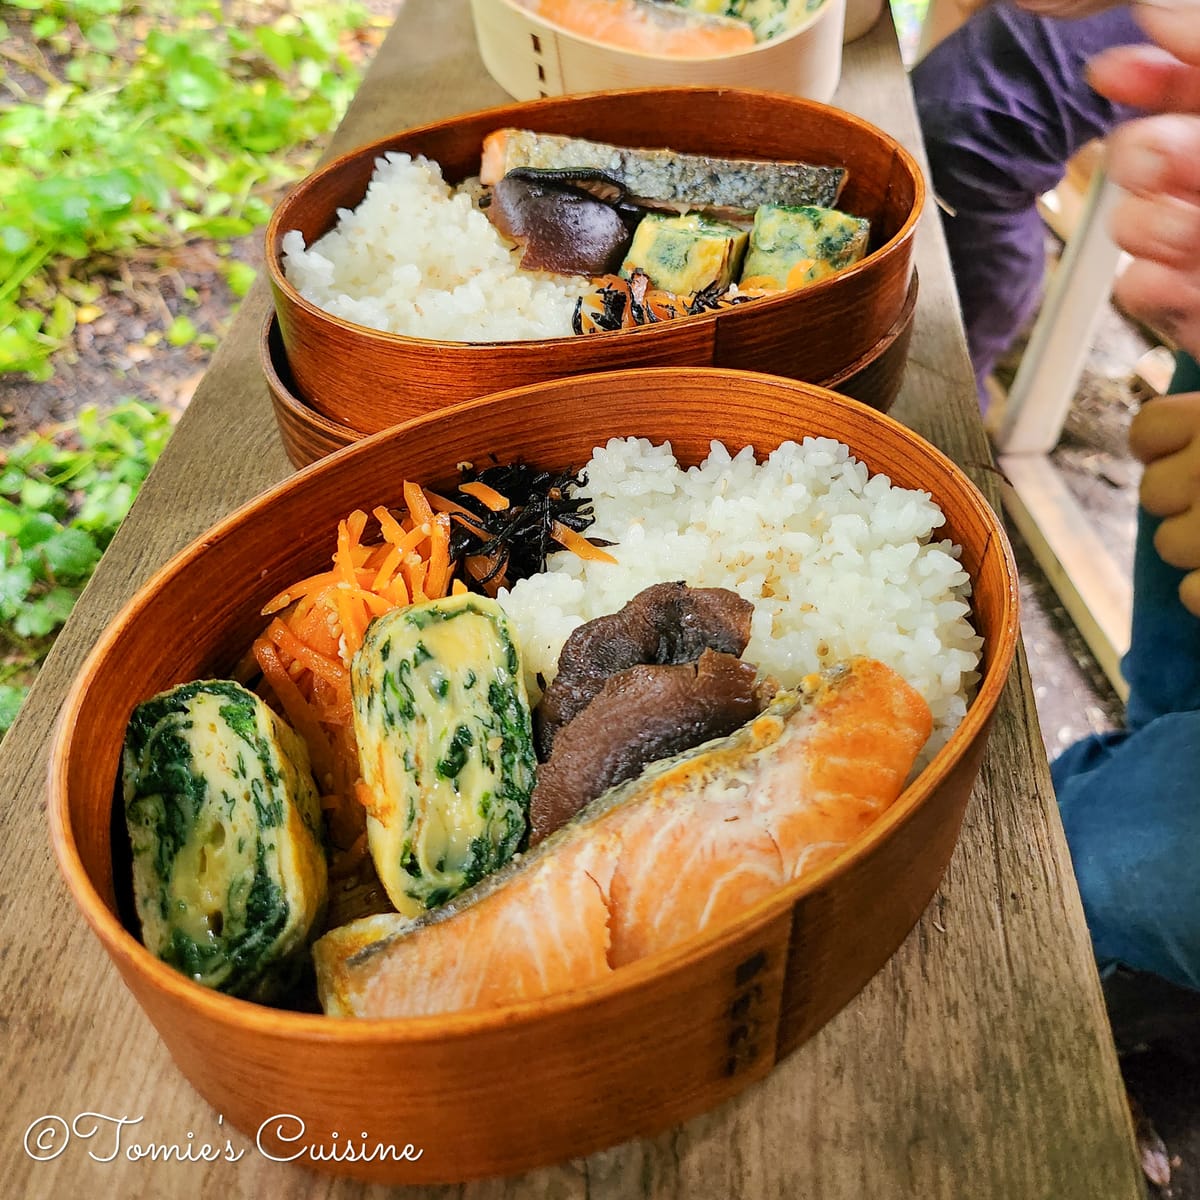 Tasty picnic ideas inspired by our Nobonsai team lunches